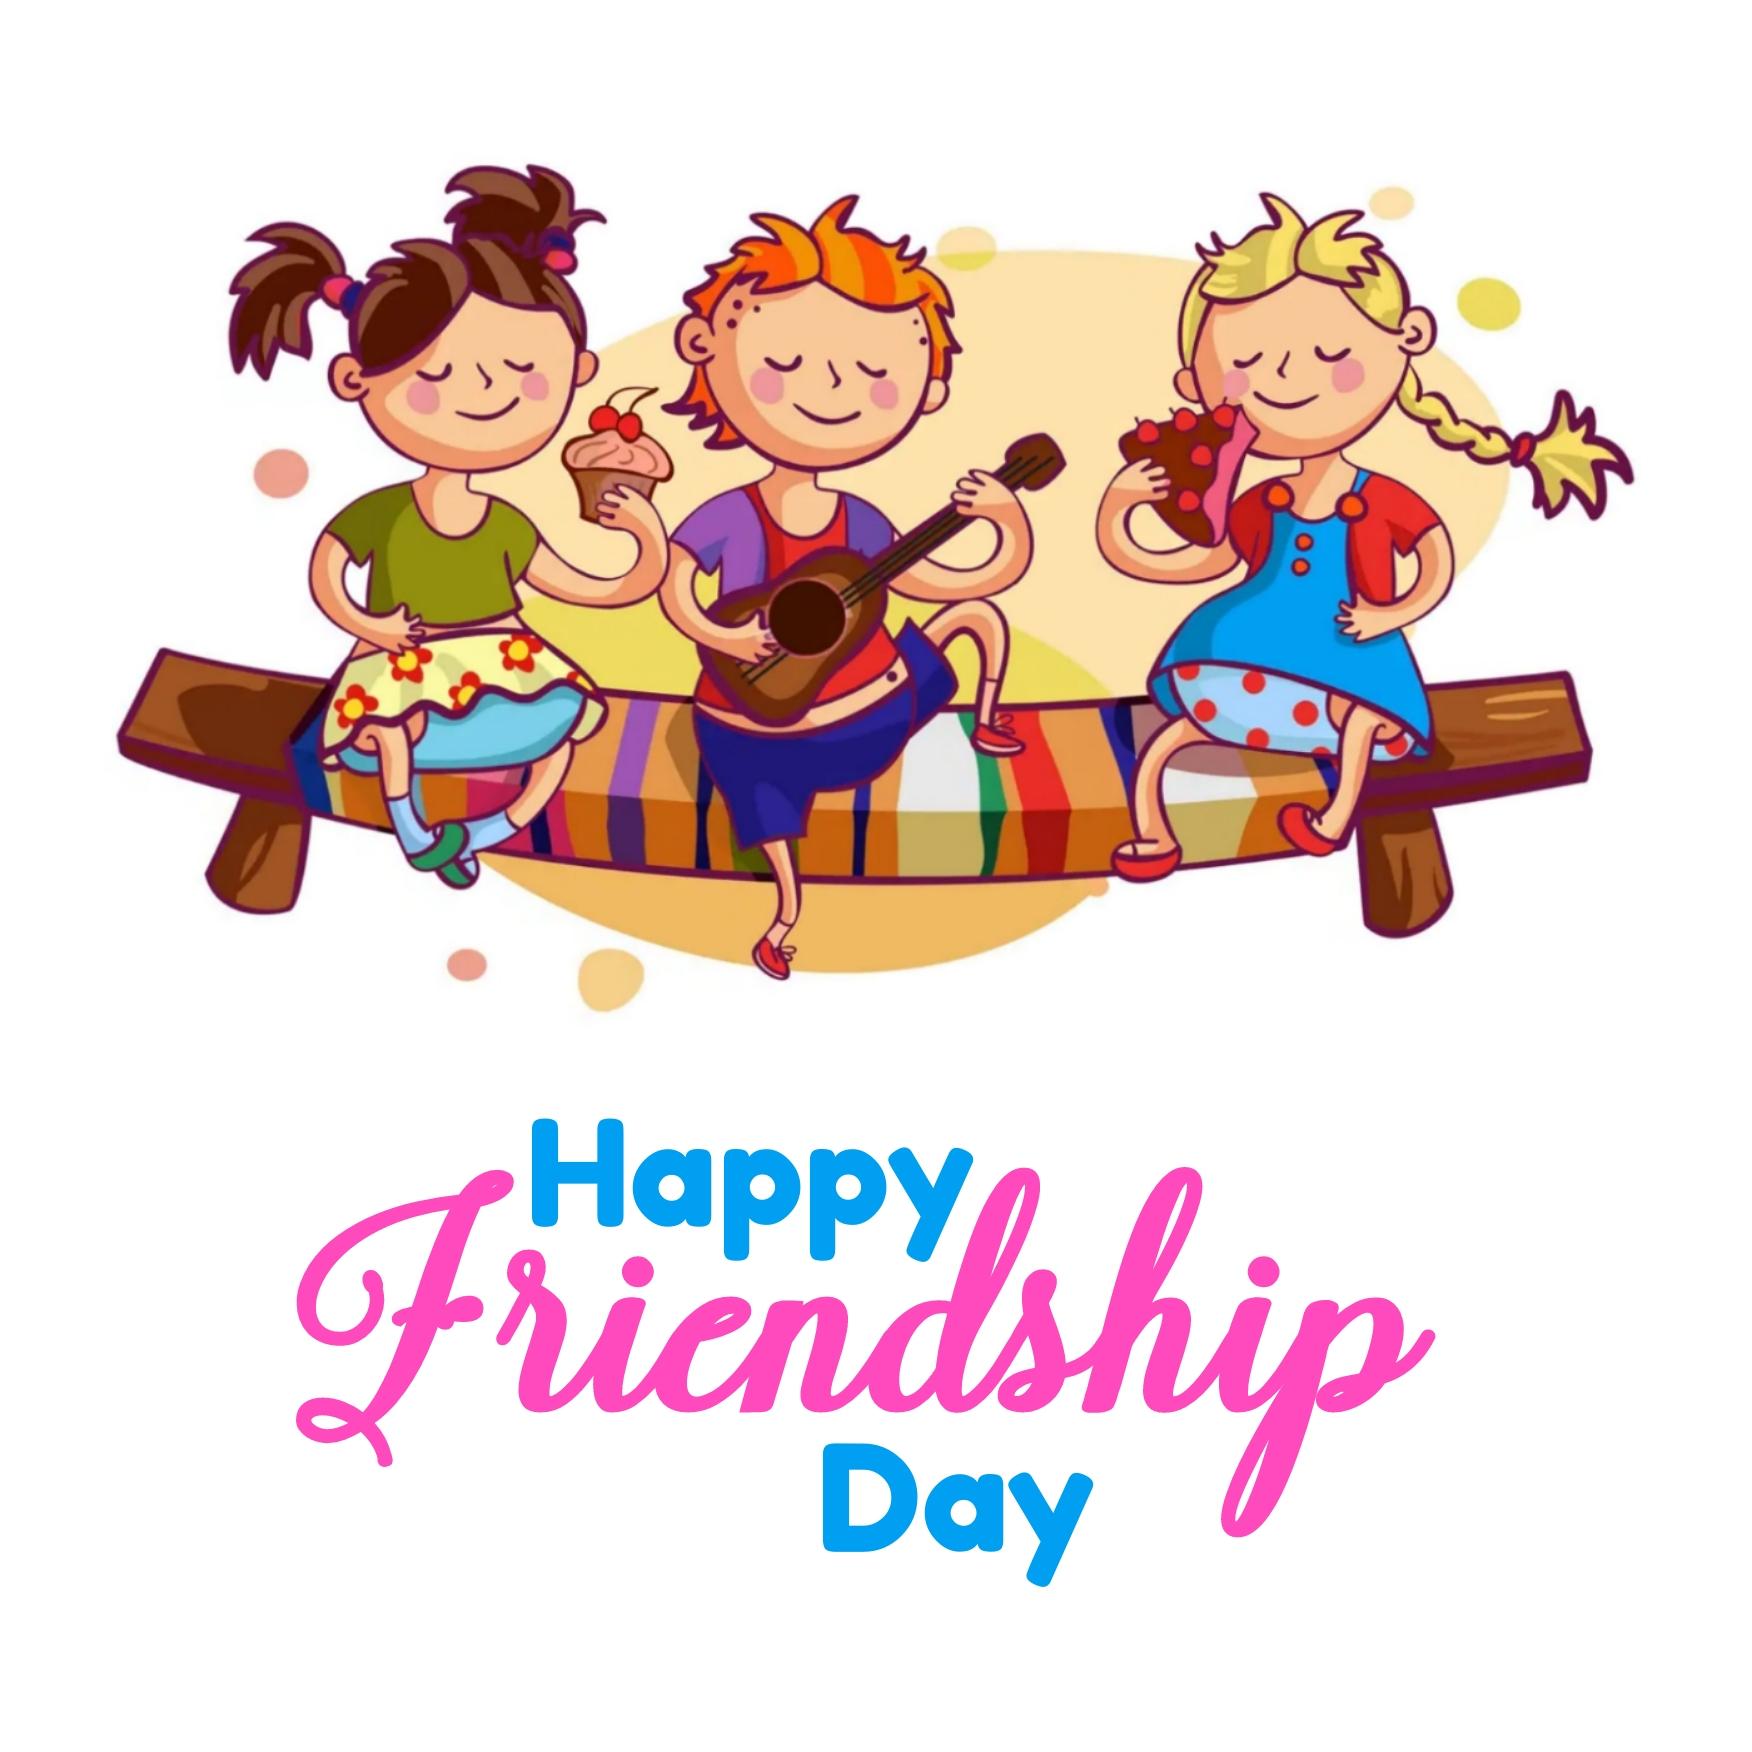 Cute Friendship Day Images